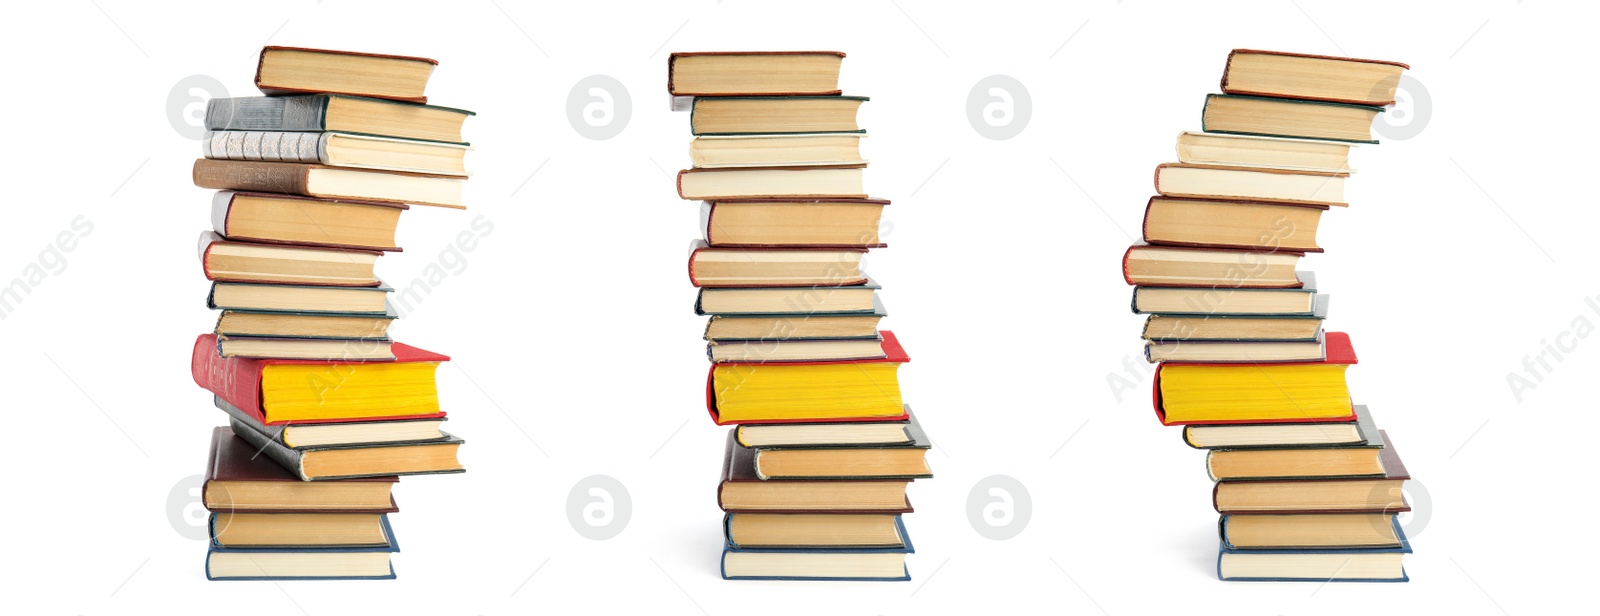 Image of Collection of different retro books on white background